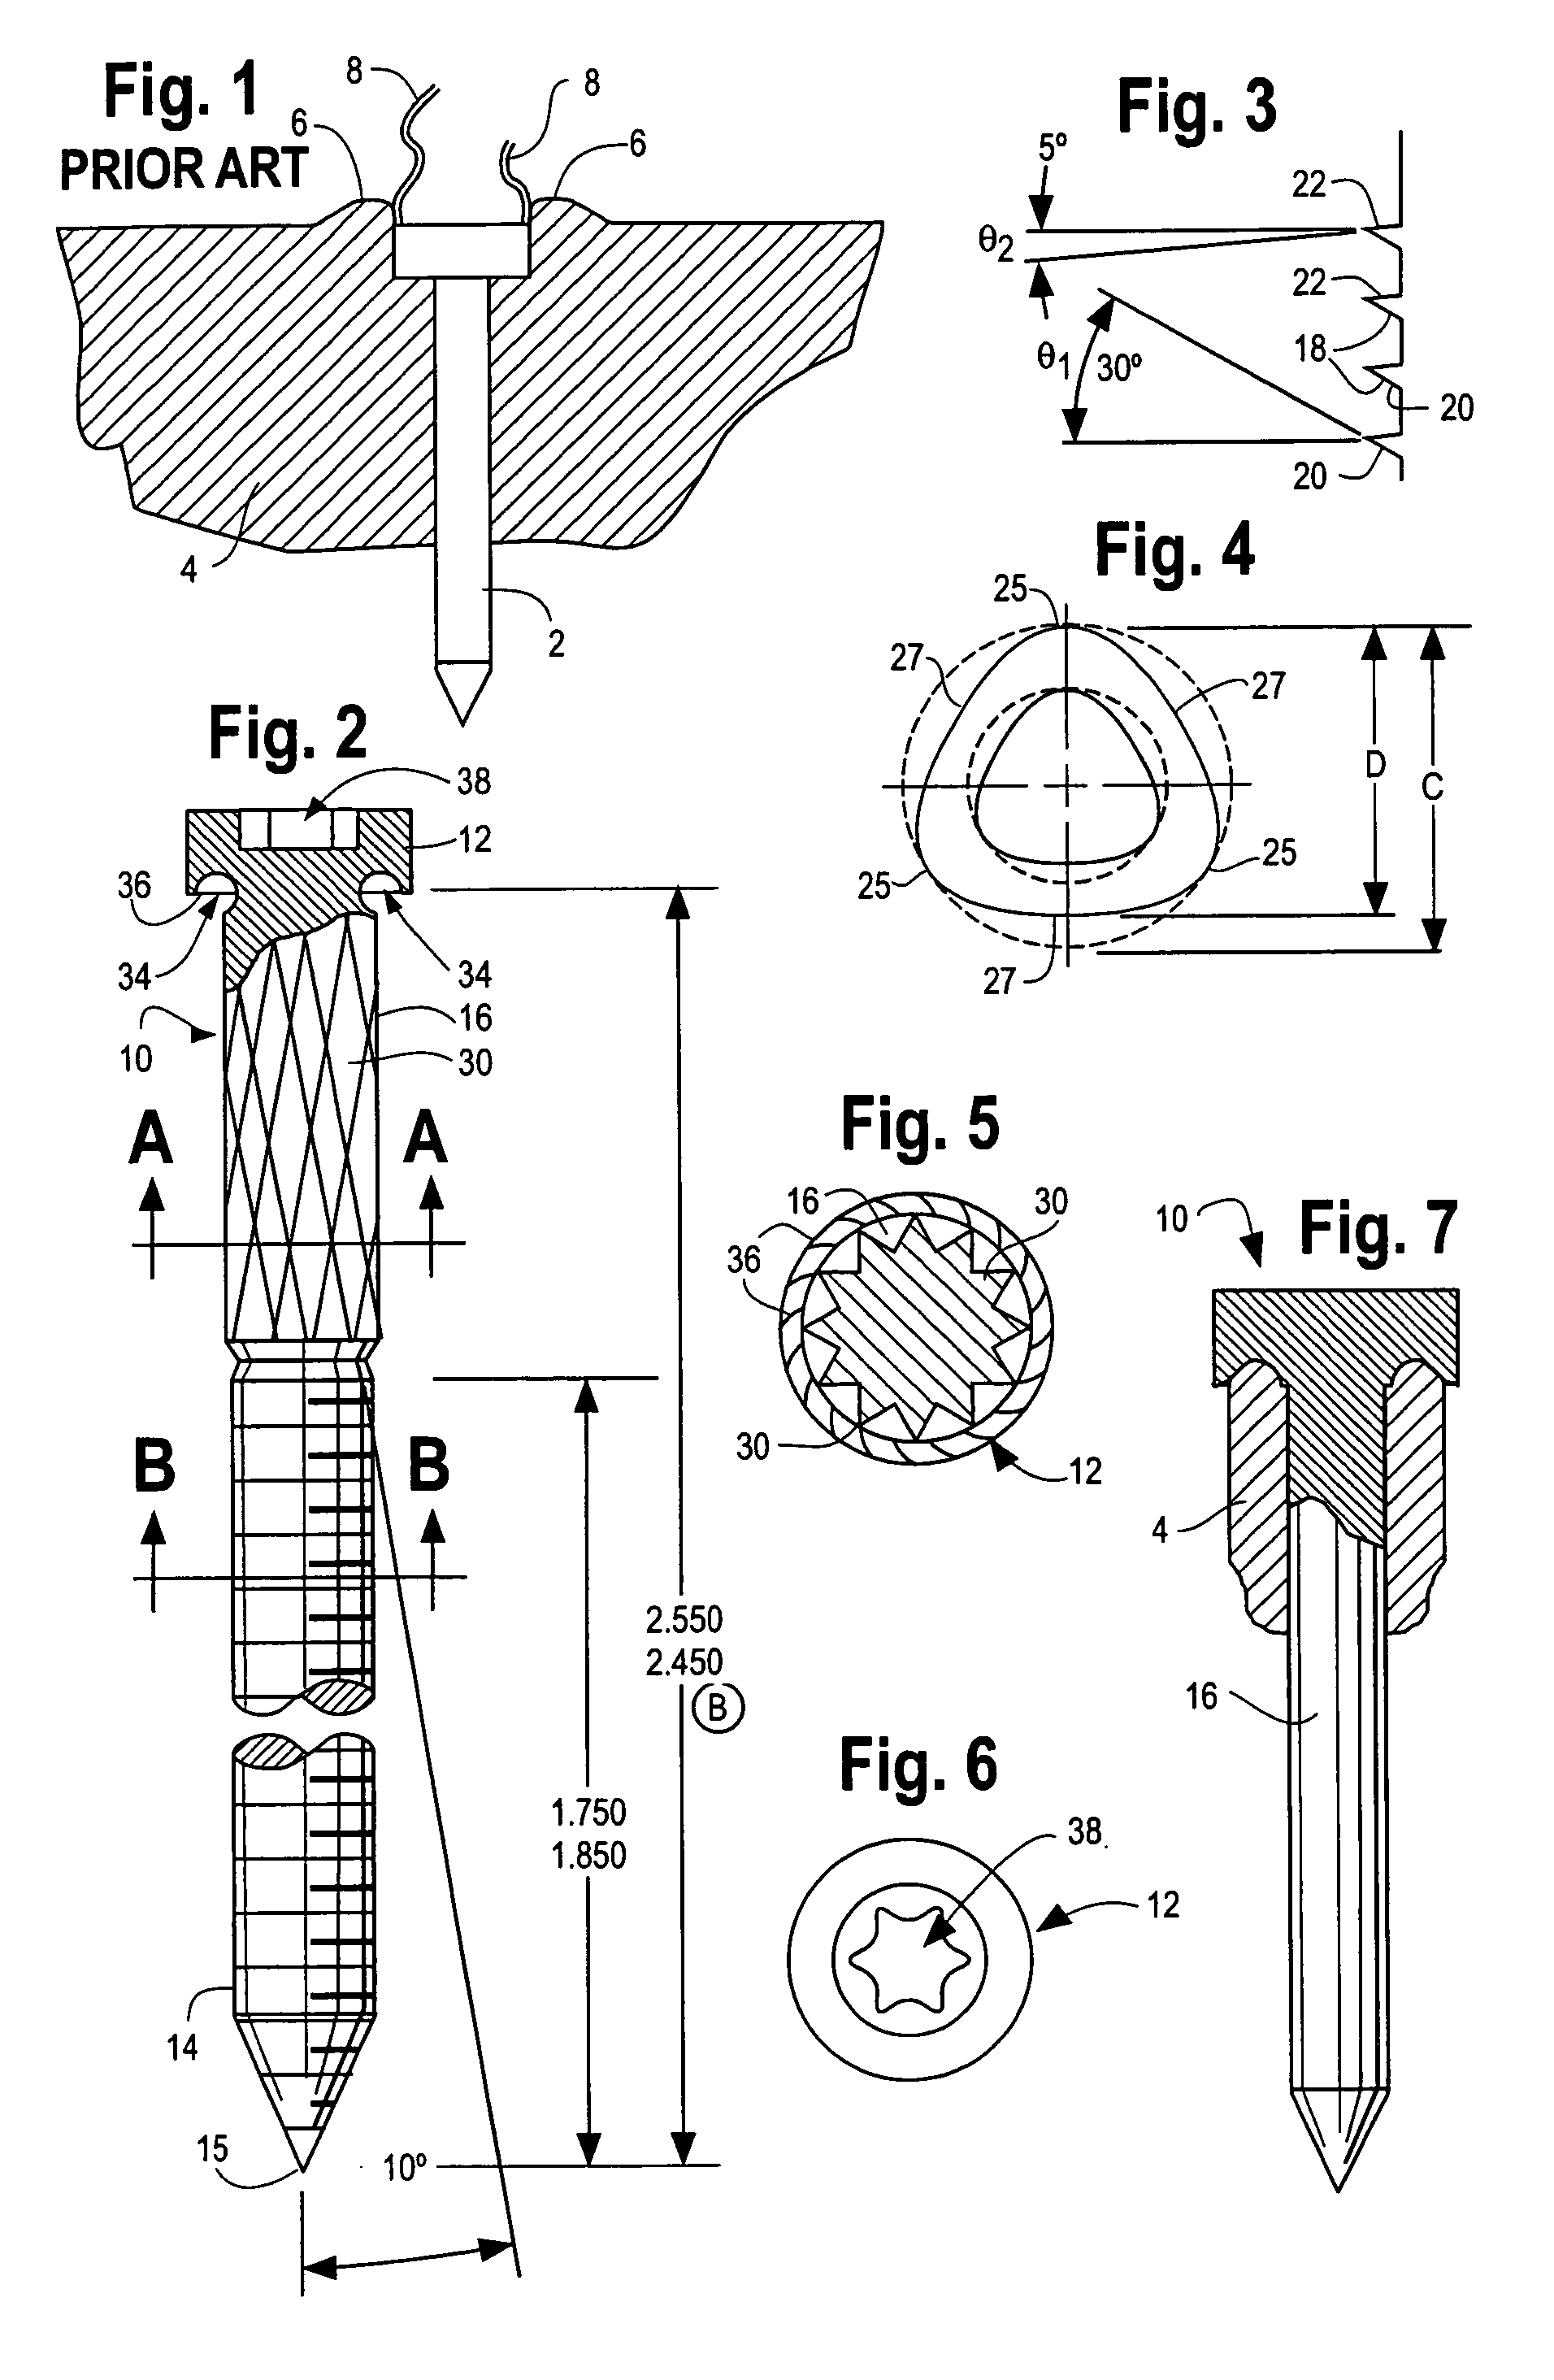 Hybrid screw for composite lumber and wood